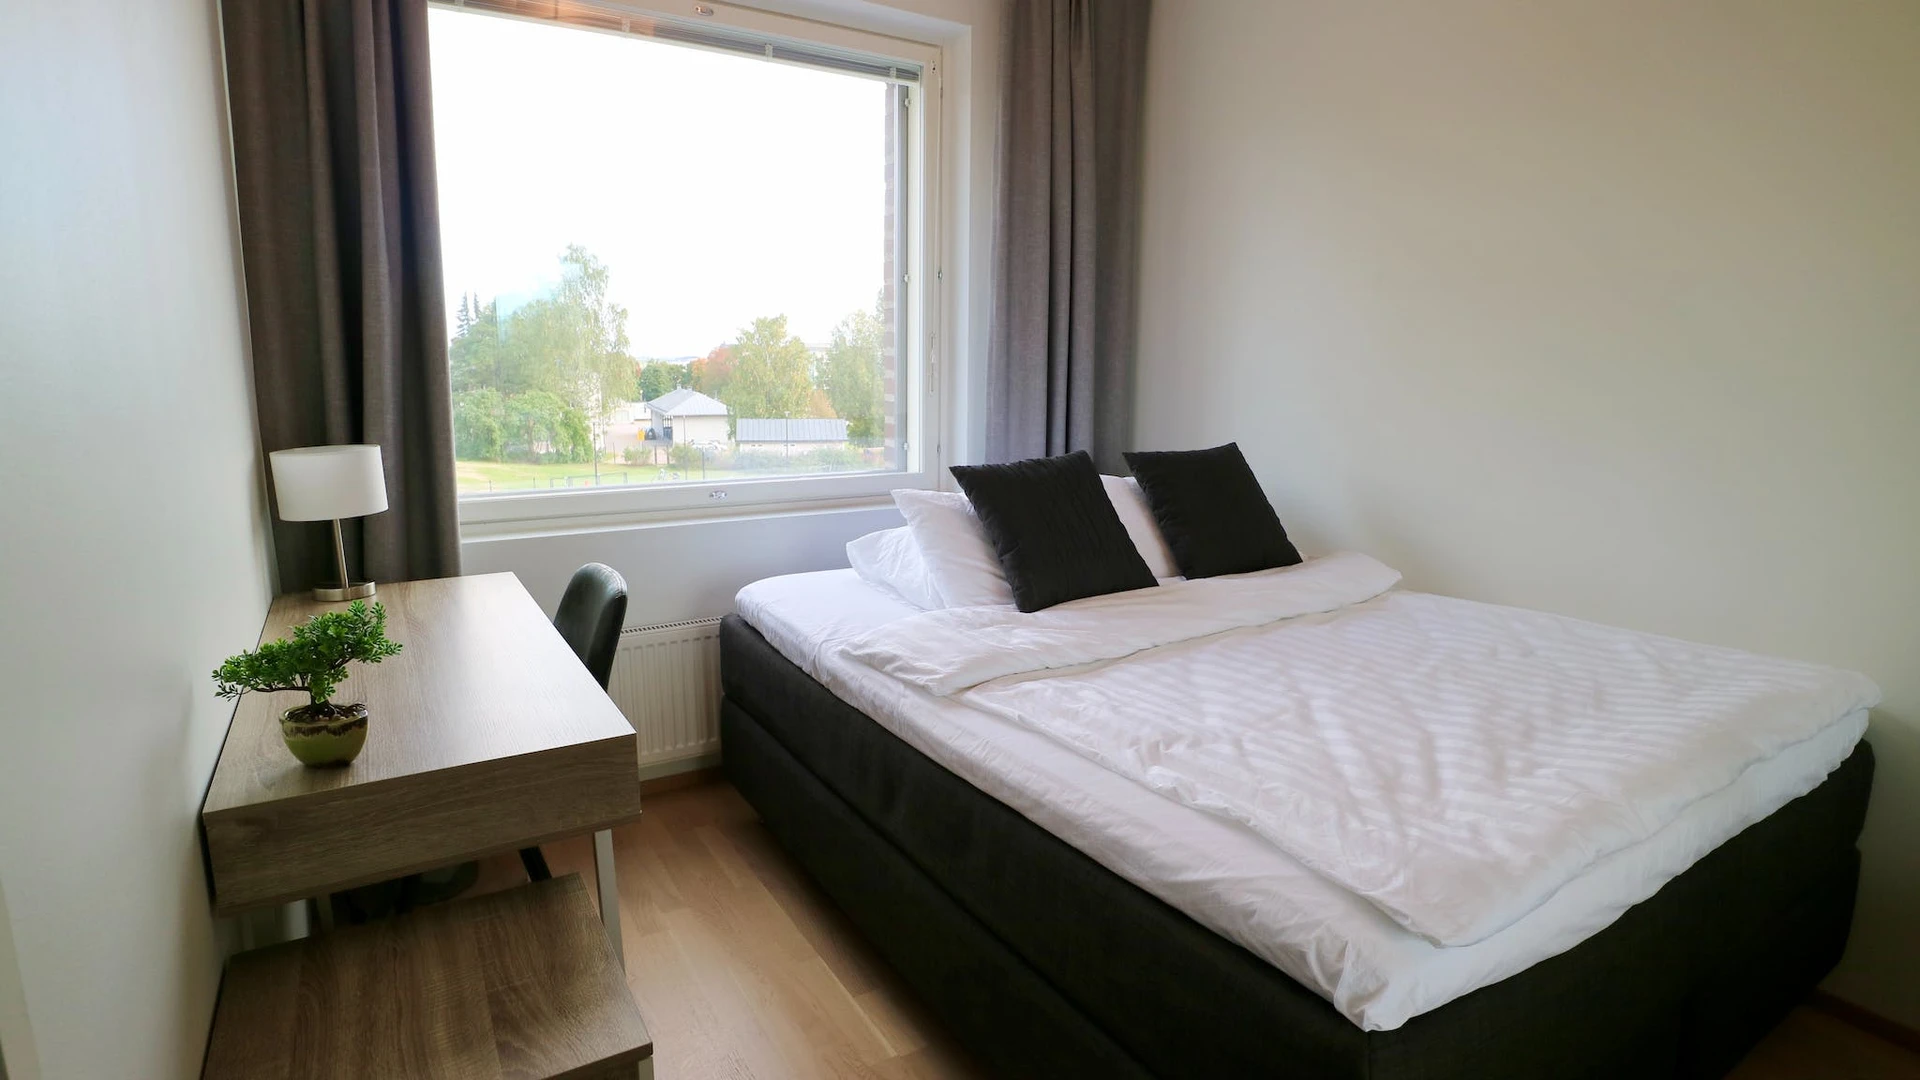 Accommodation in the centre of Helsinki